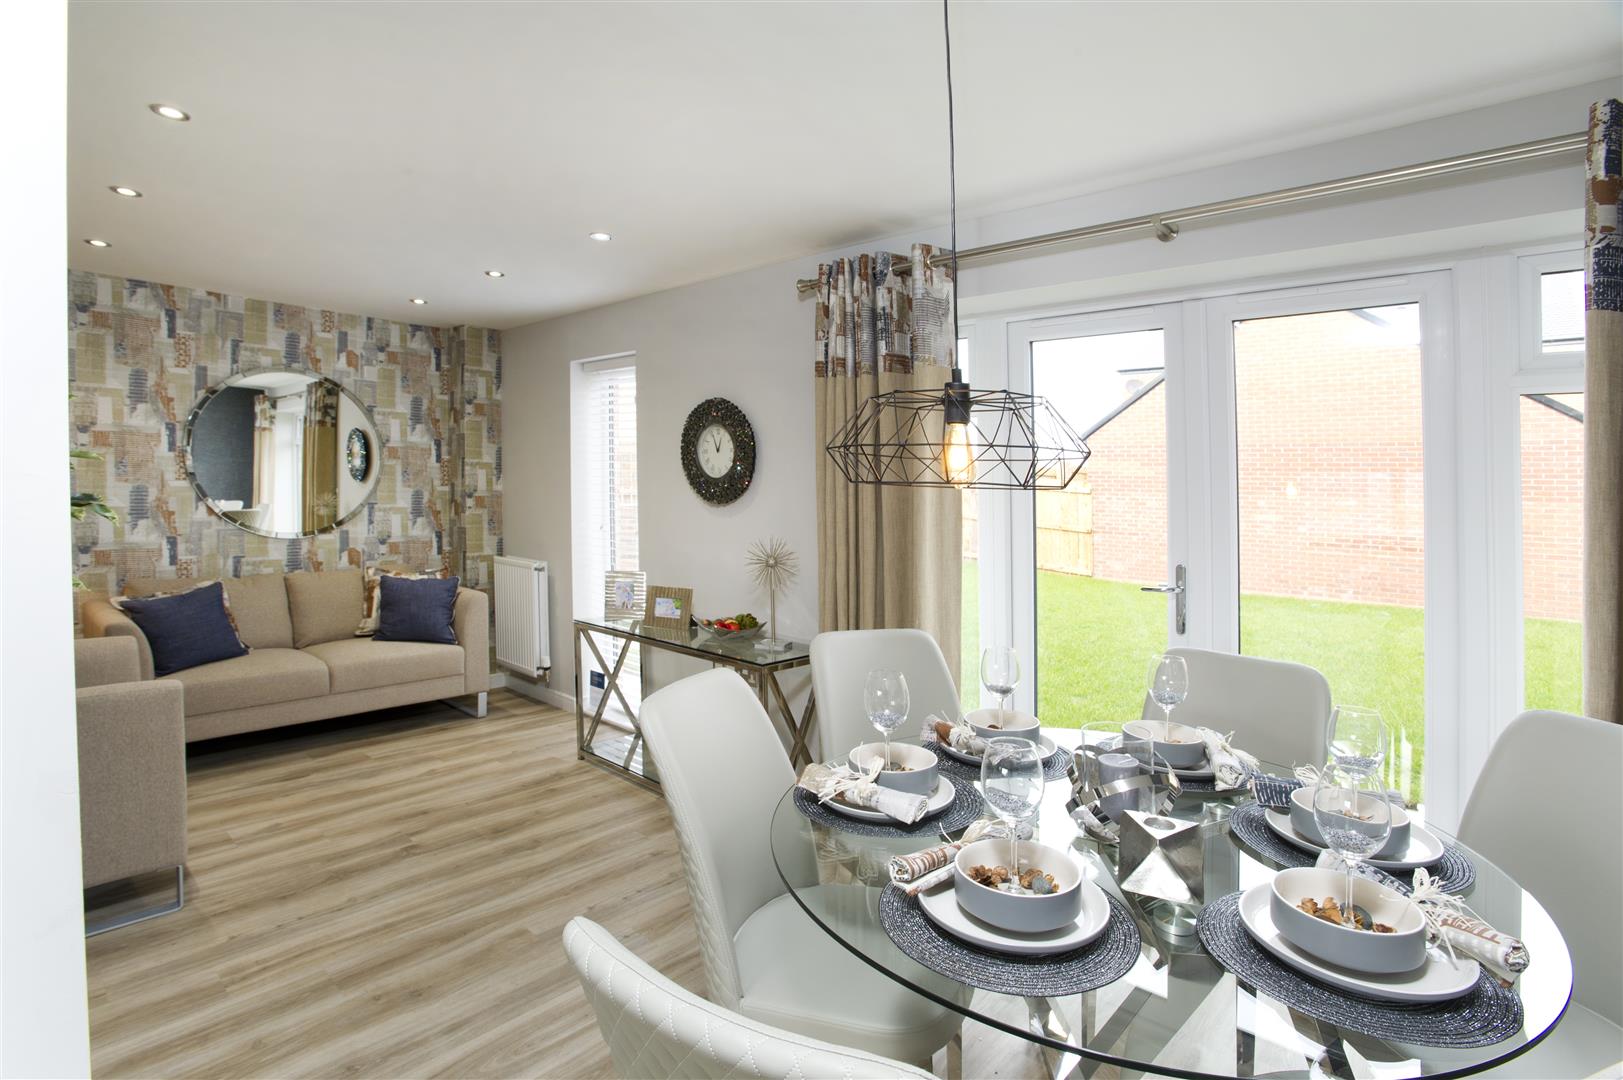 4 bed detached house for sale in White House Drive, Newcastle upon Tyne, NE12